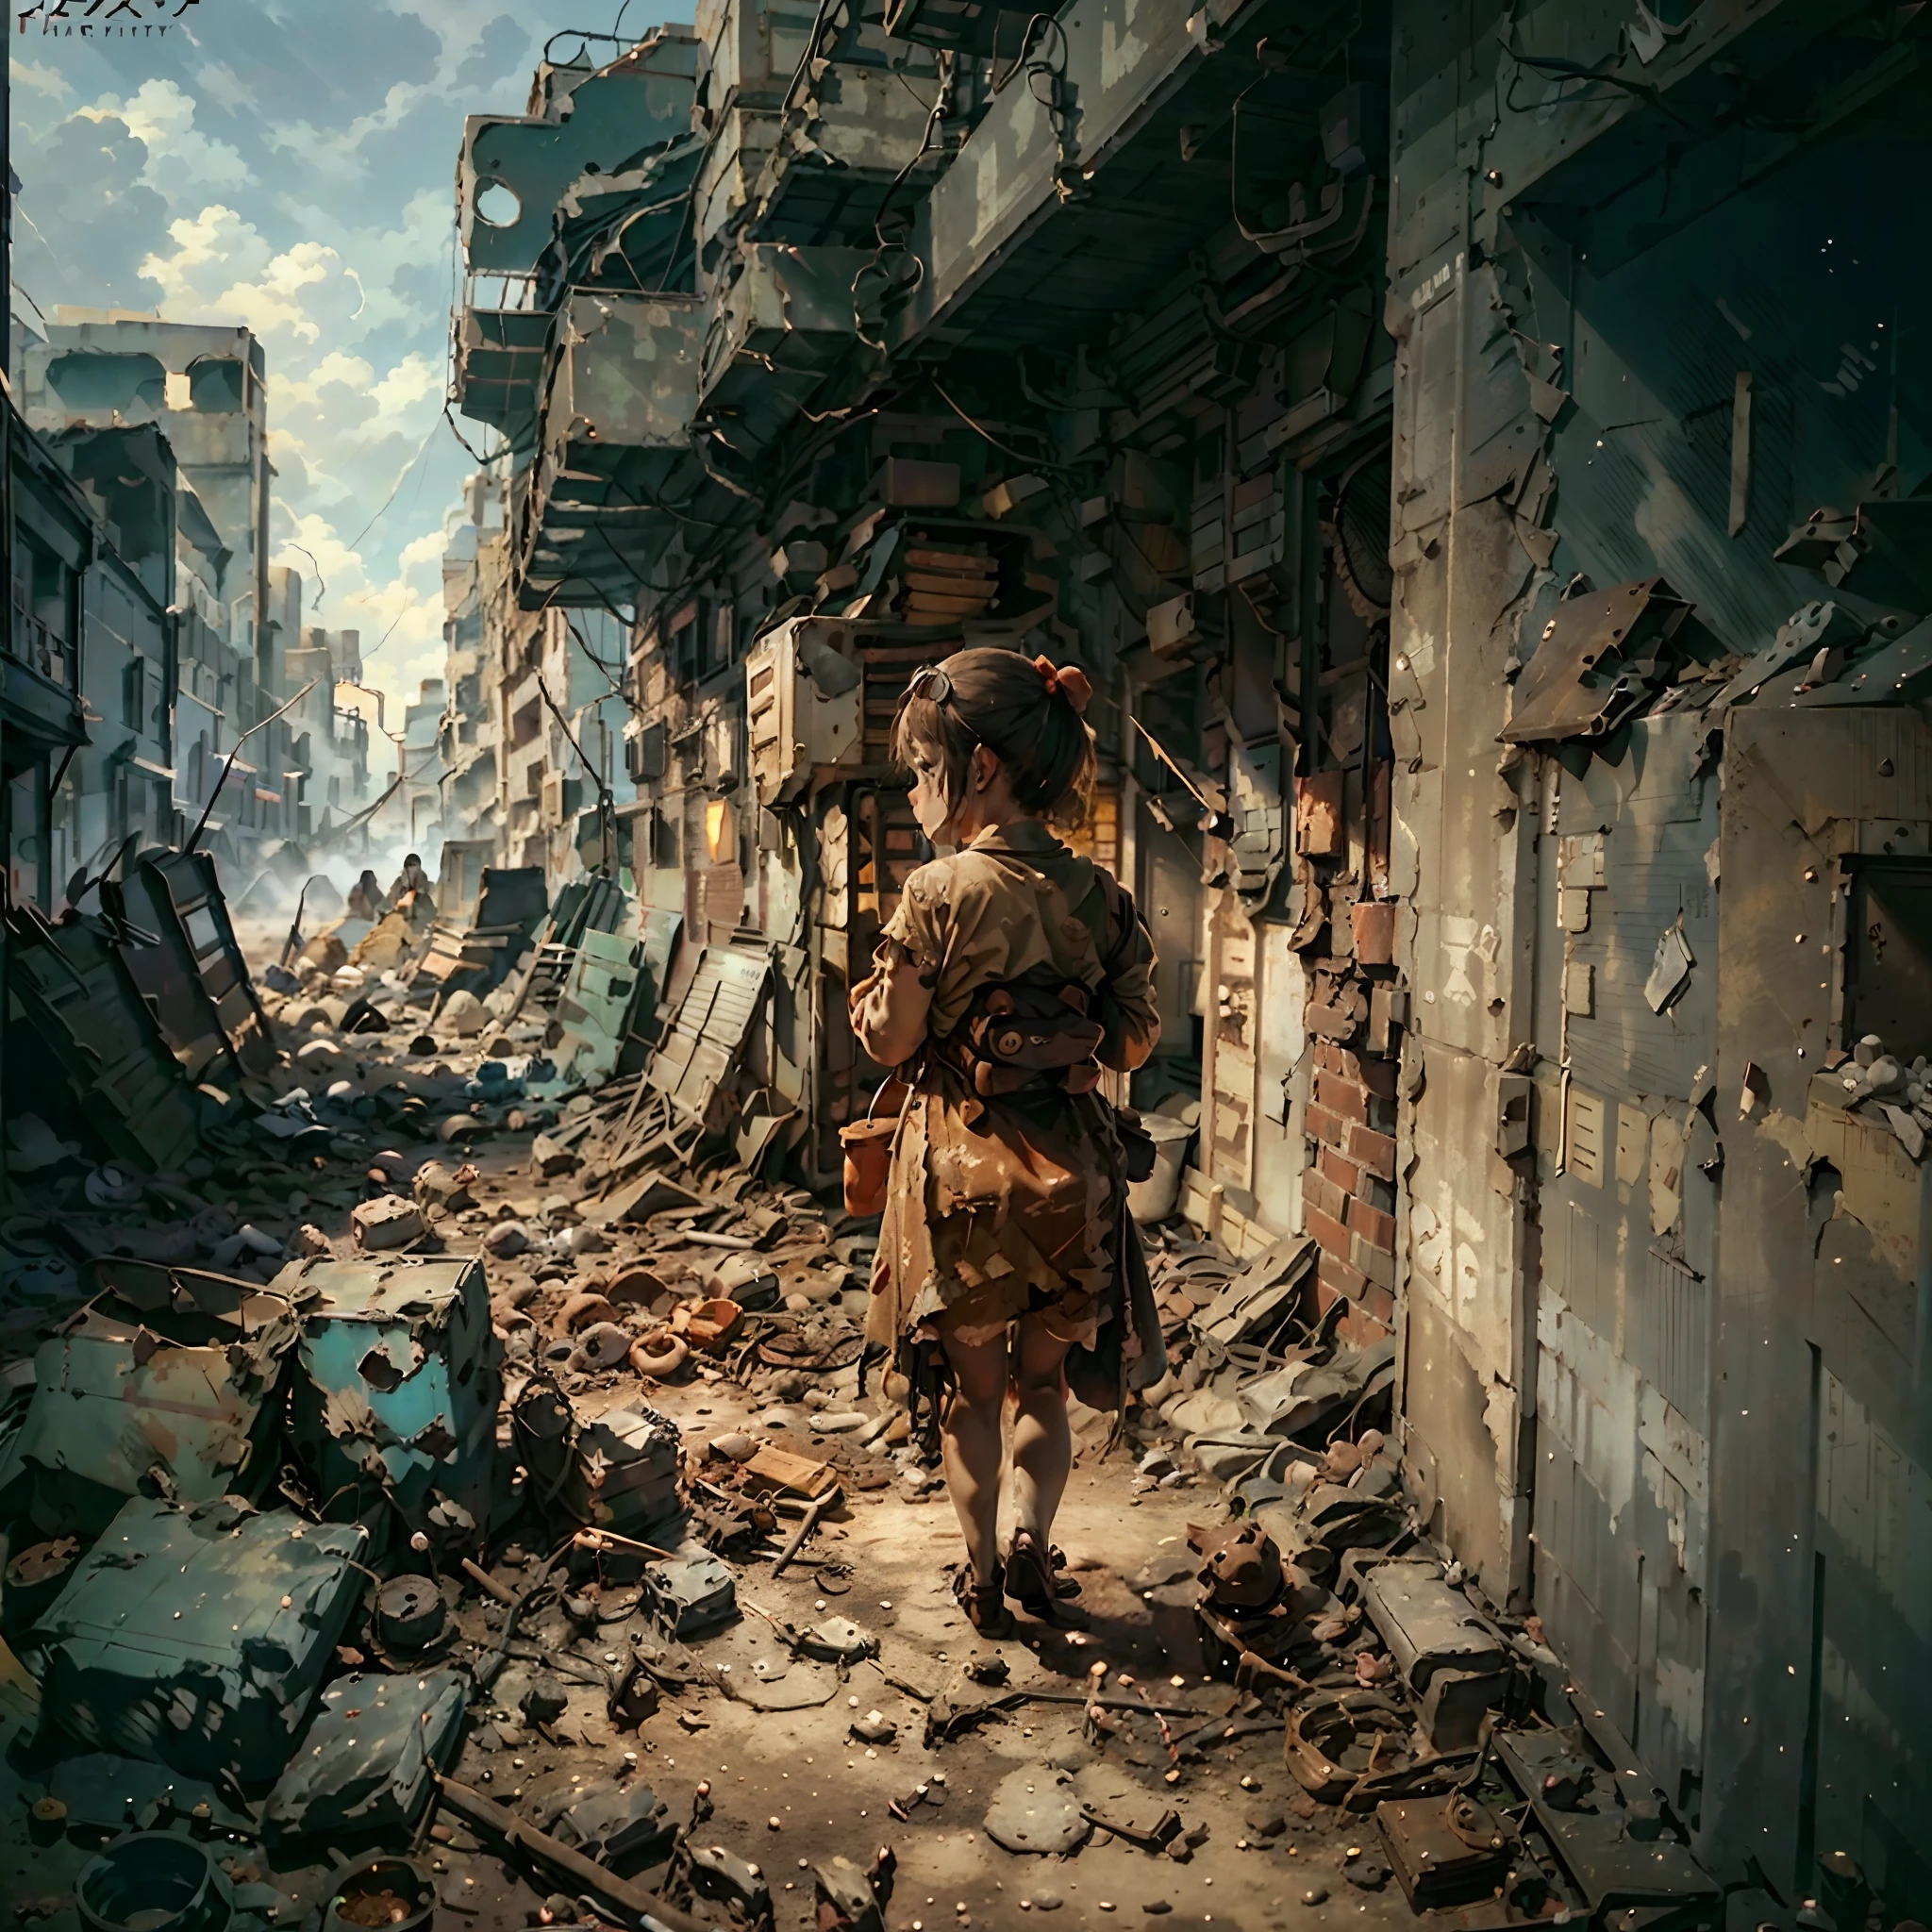 A  in a bright big red dress during the war，Carrying the back of a bear doll，Ruins of war，Dog's breakfast。（very wide angle shot，The focus is on the back of the character）The background is a dusty apocalyptic scene